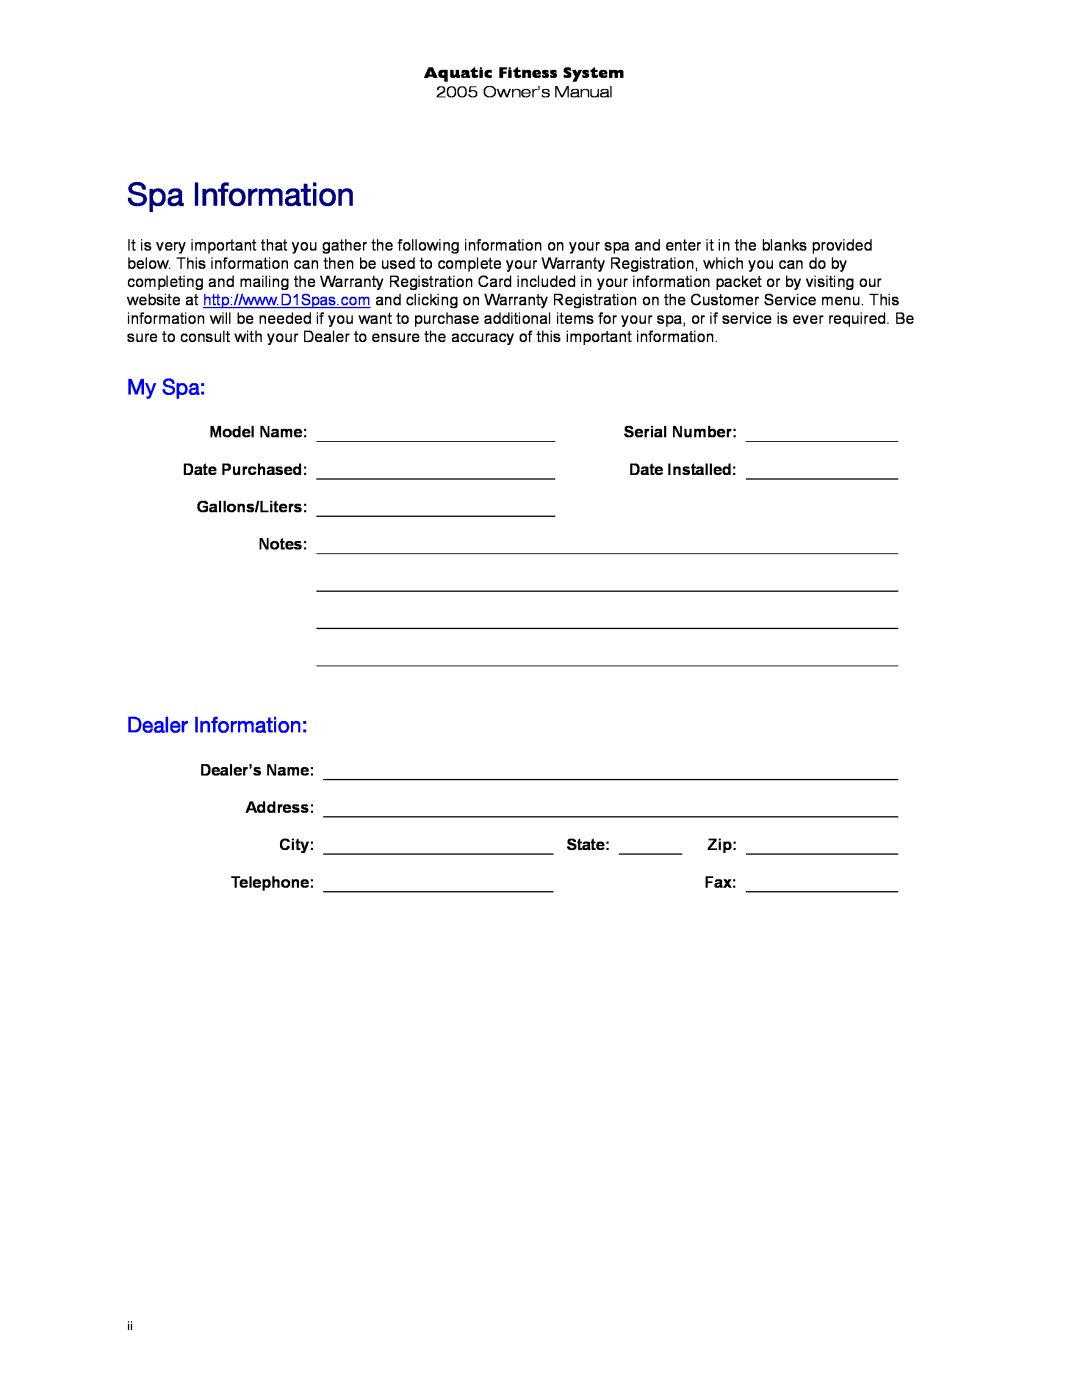 Dimension One Spas 01513-192 Spa Information, My Spa, Dealer Information, Aquatic Fitness System, Model Name, Notes, City 